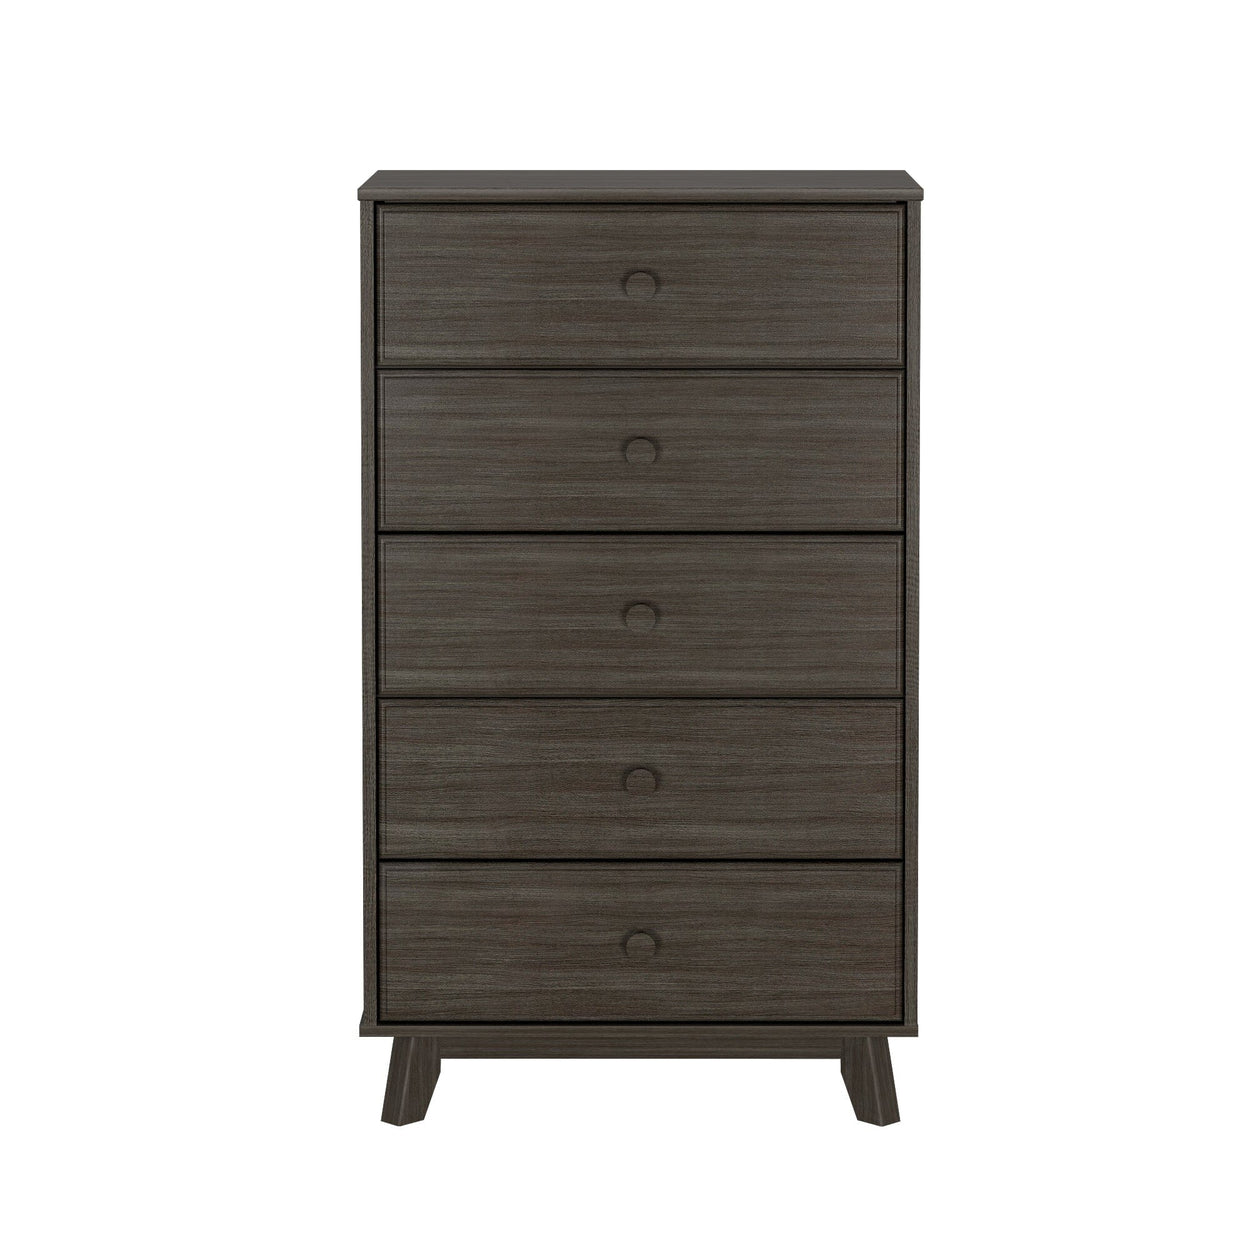 1800215000-151 : Furniture Max & Lily 5 Drawer Dresser, Clay